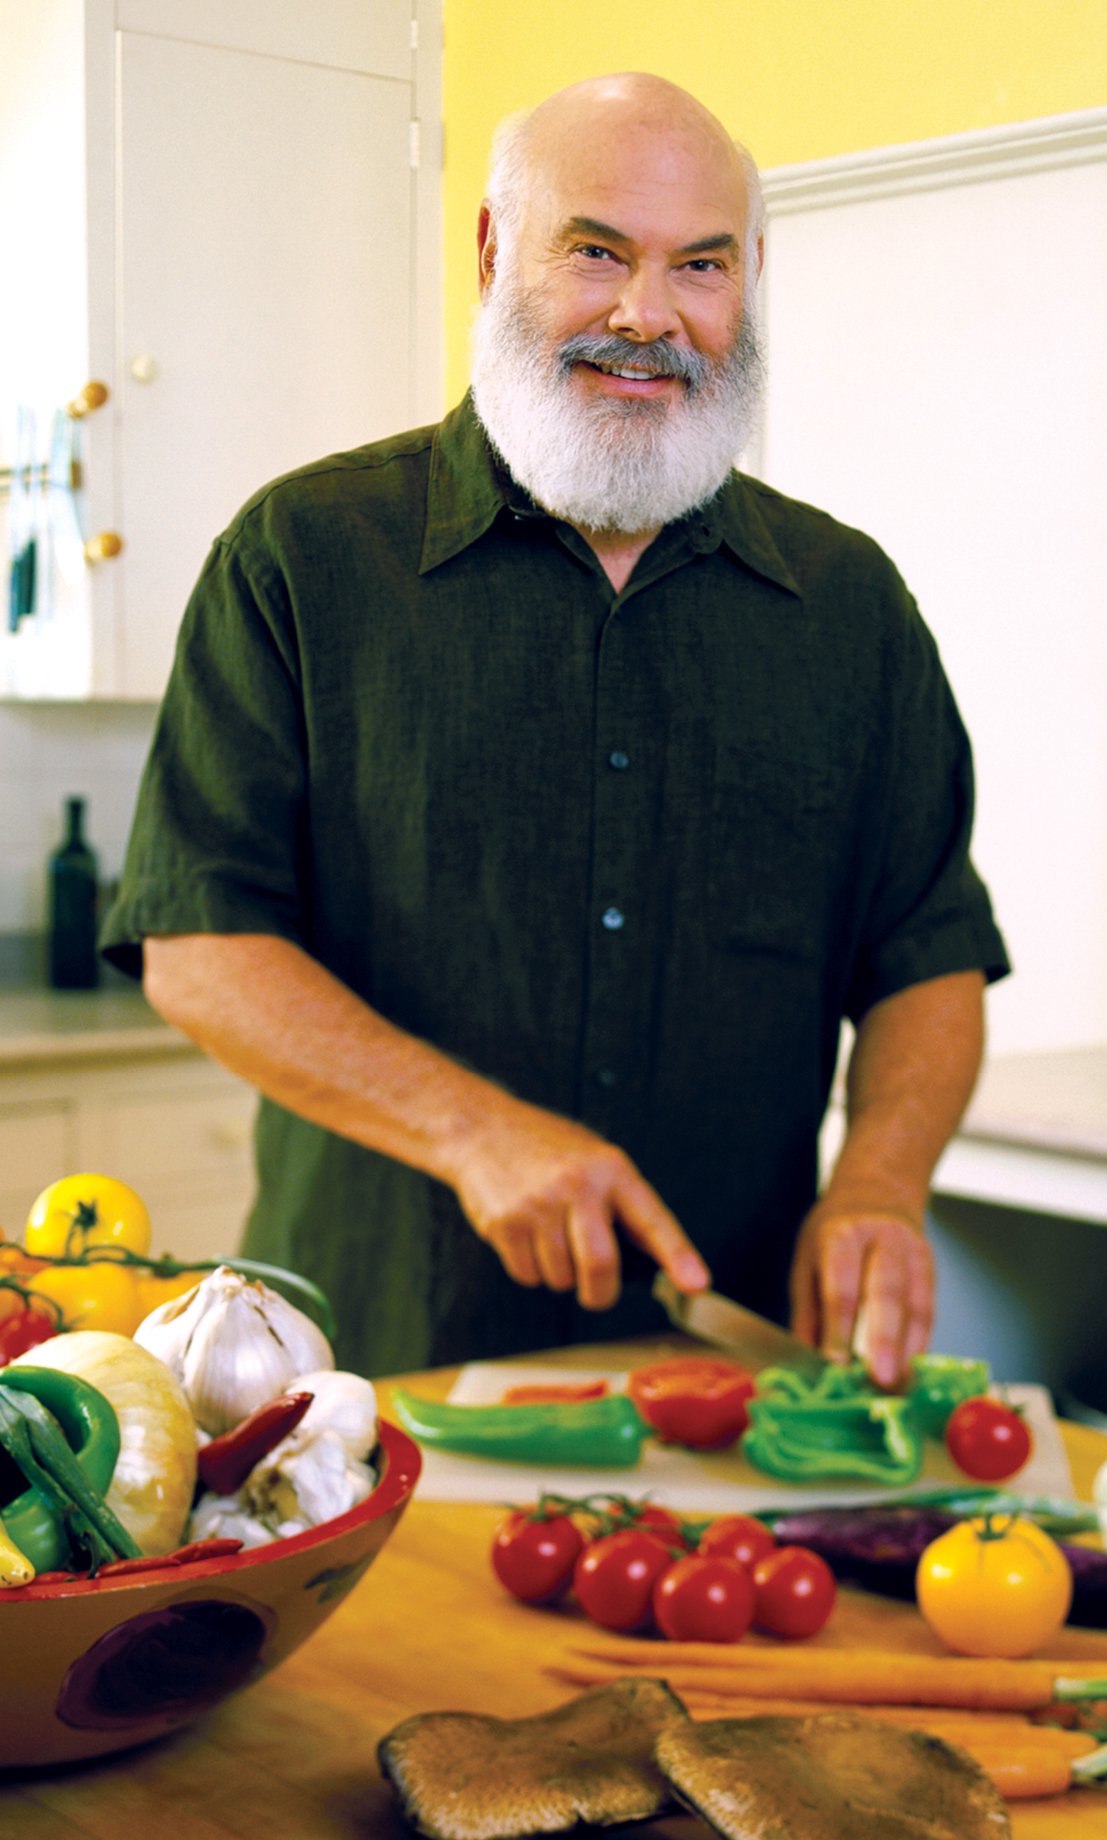 Cooking With Anti-Inflammatory Spices - Dr. Weil's Healthy Kitchen